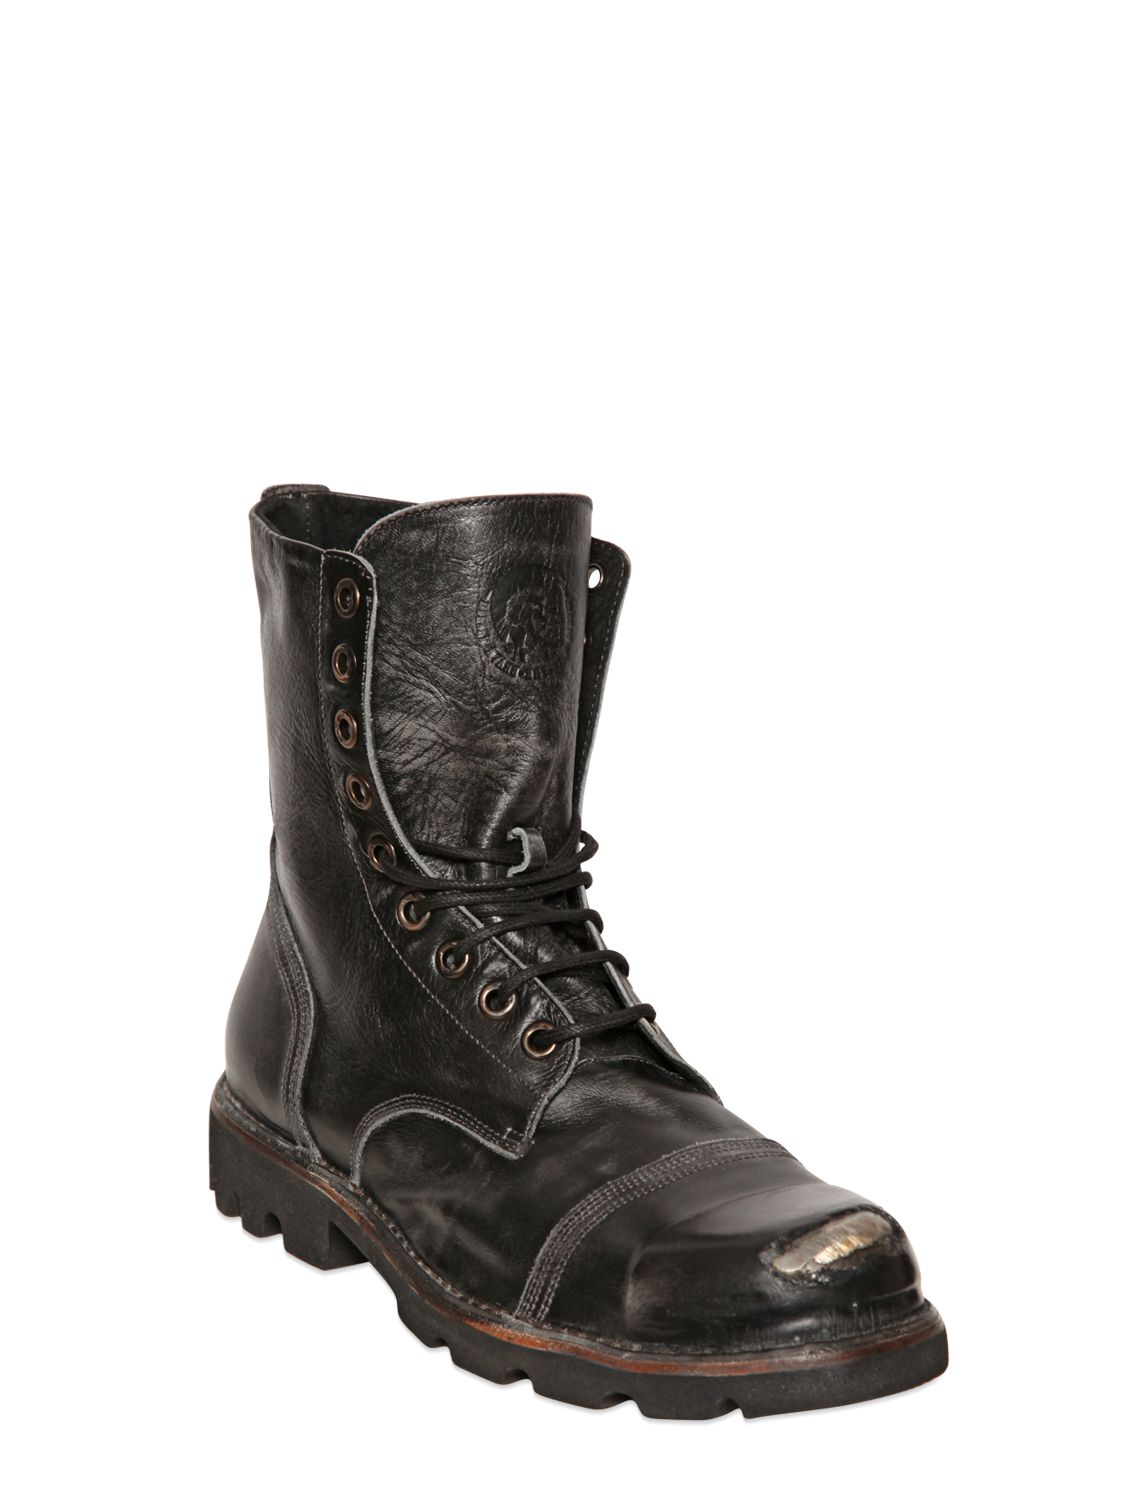 Lyst - Diesel Leather Lace-Up Boots in Black for Men